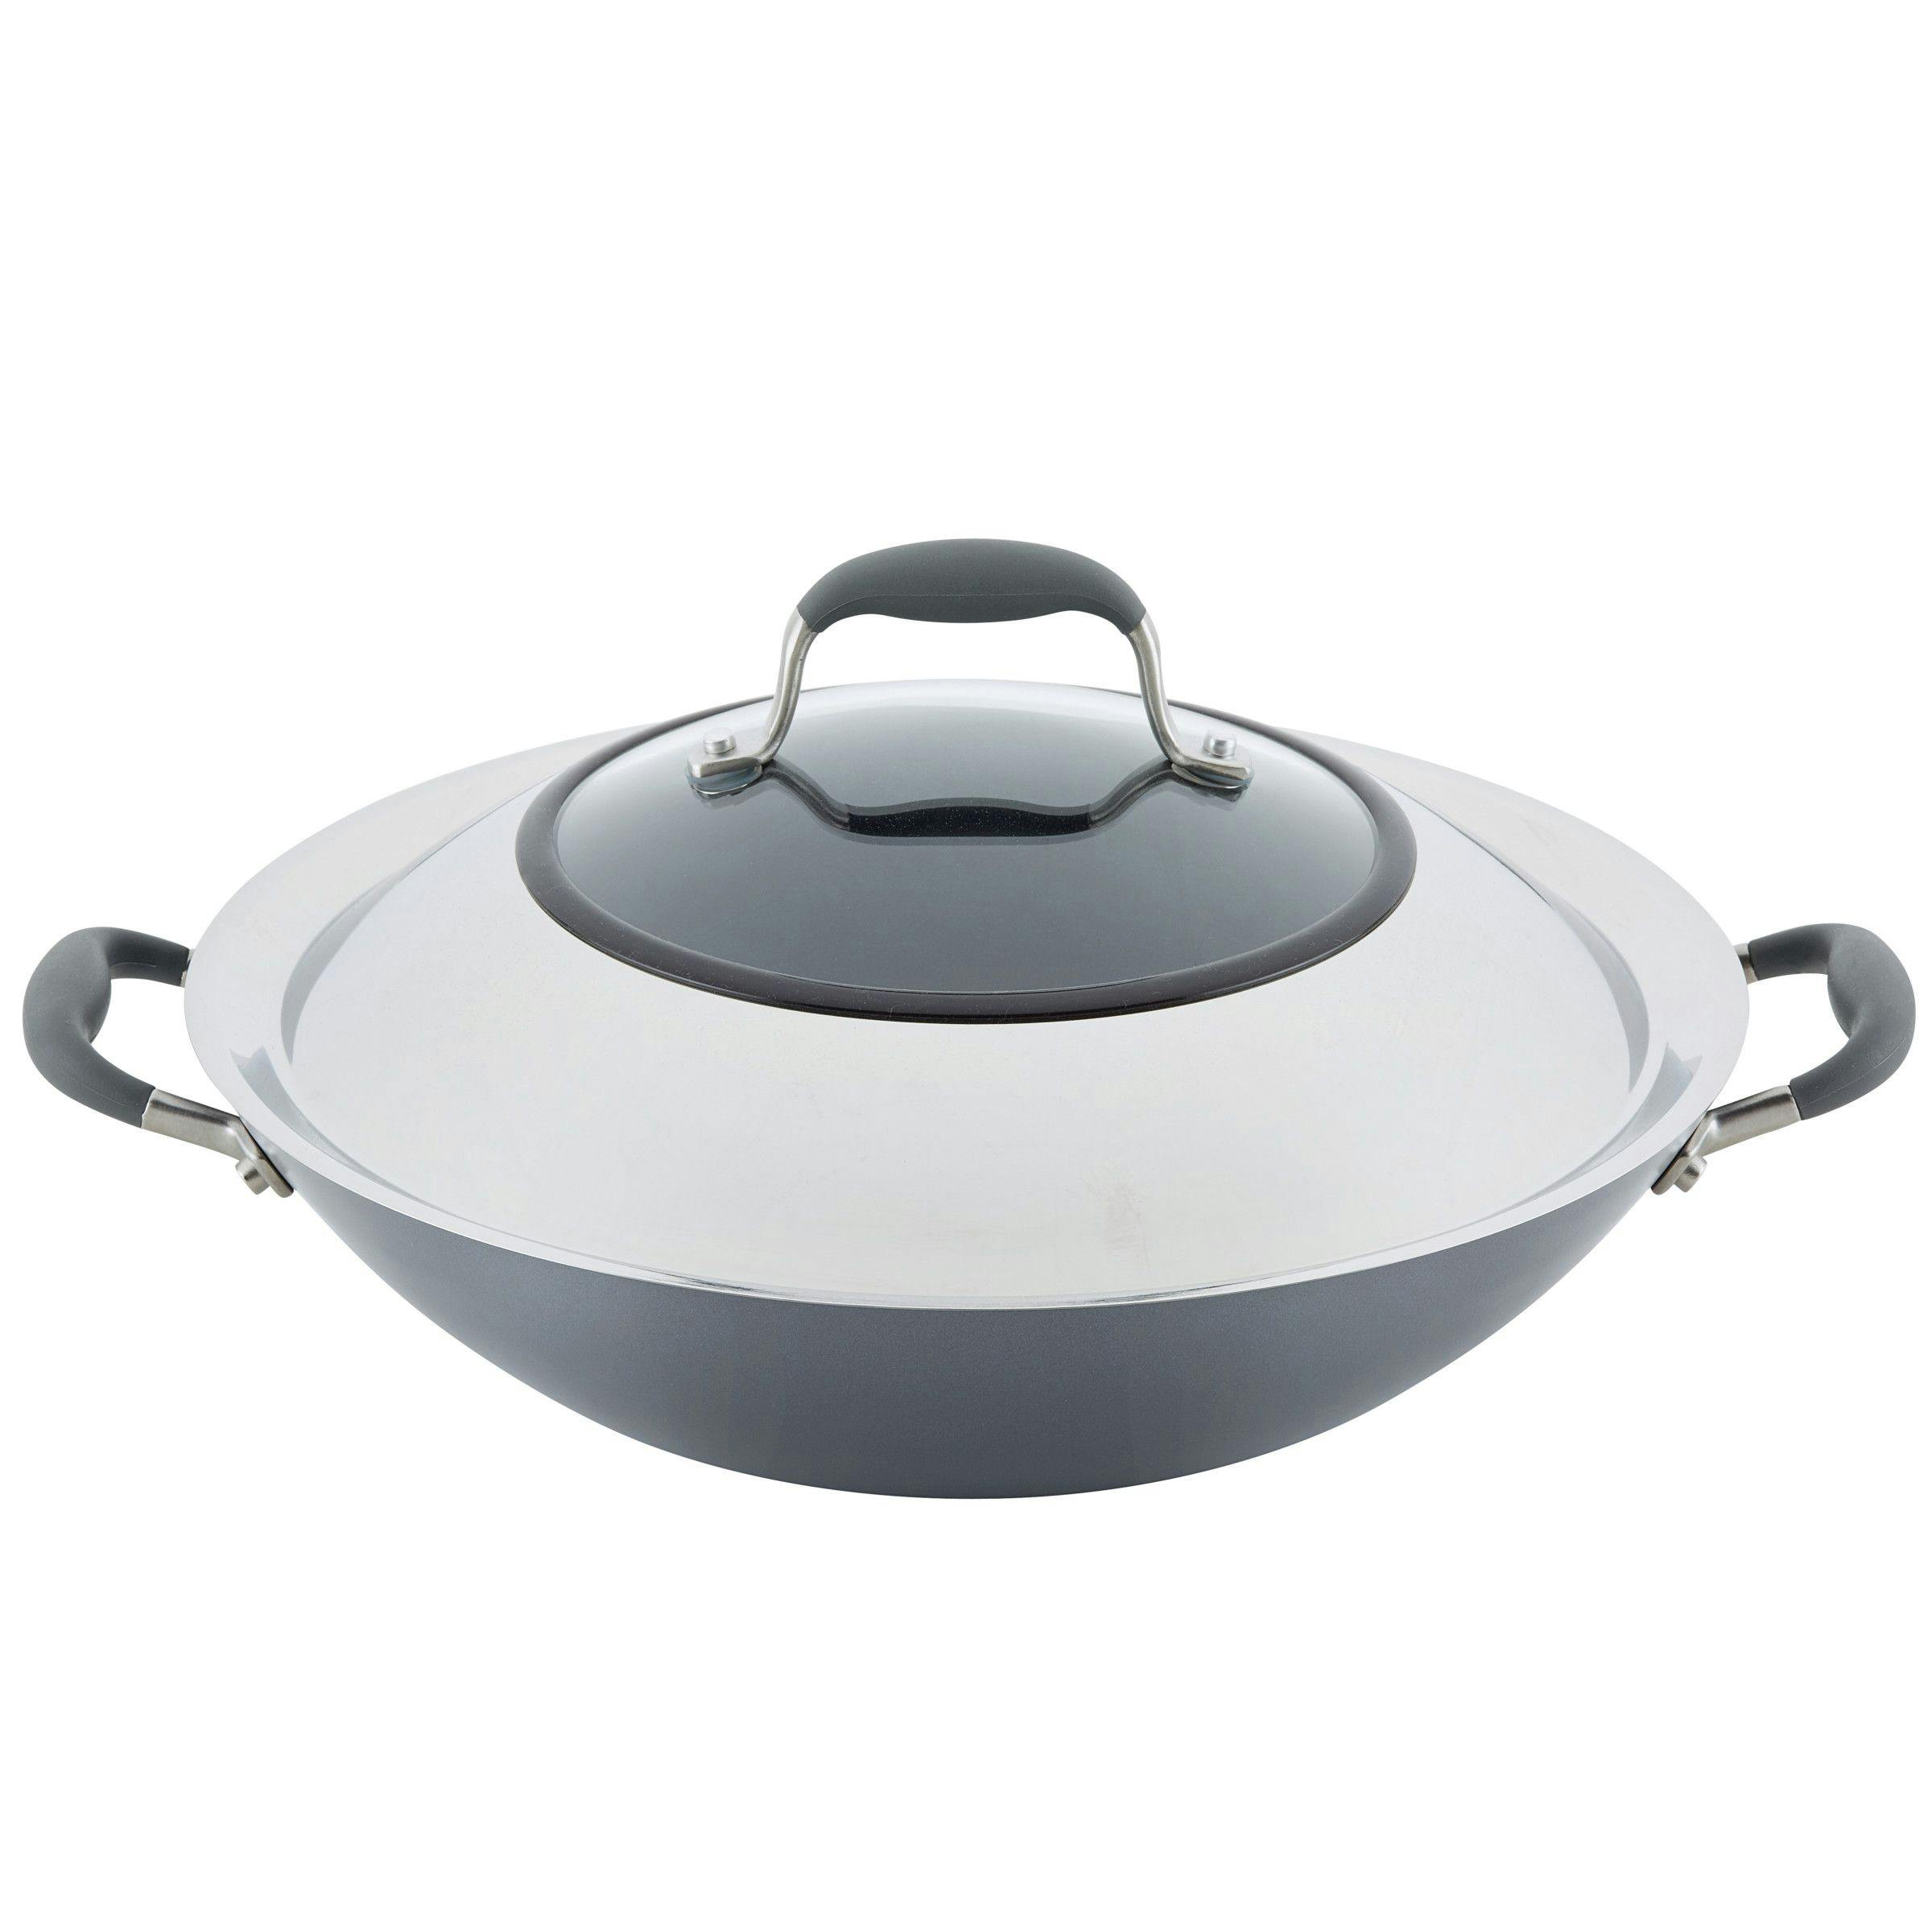 Anolon Advanced Home Hard-Anodized Nonstick Wok with Side Handles and Lid, 14-Inch